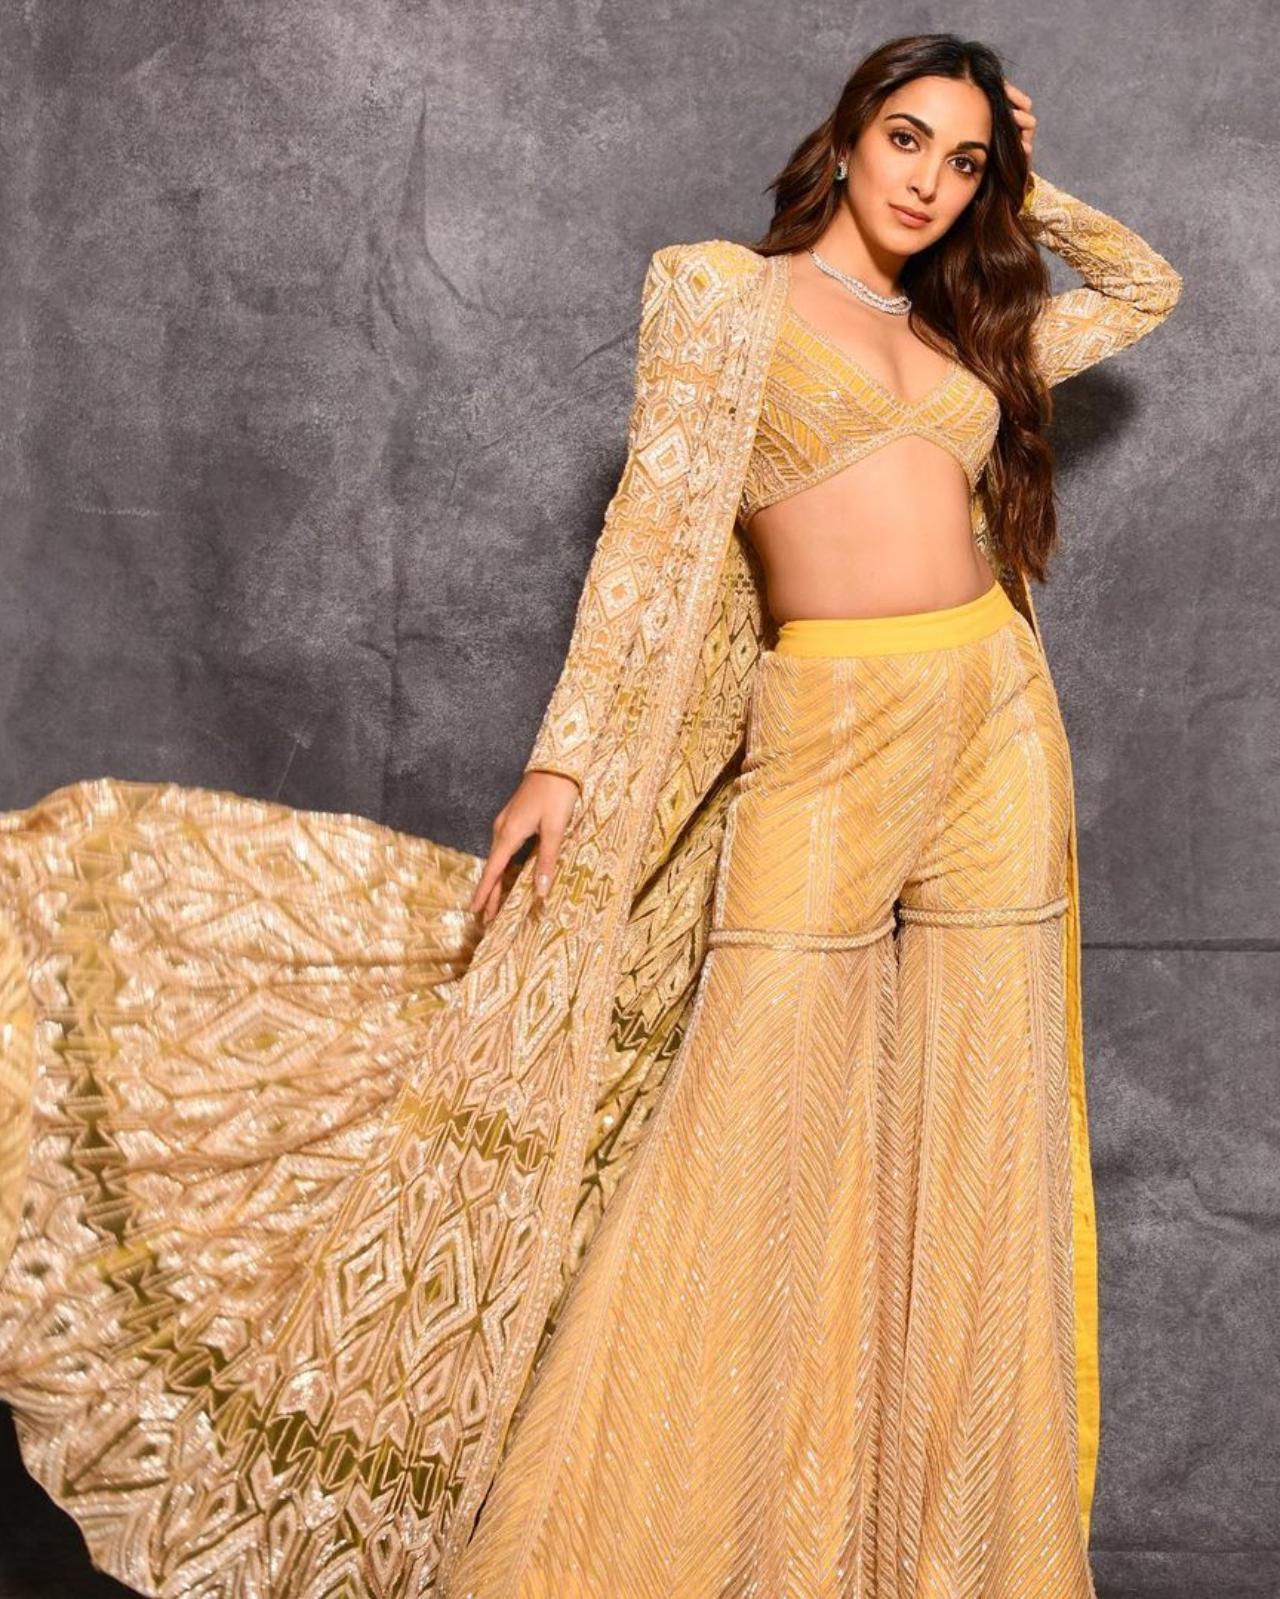 Slaying in Sharara
The 'Jugjugg Jeeyo' star who has been serving us stunning and steal-worthy ethnic looks for a long time made heads turn when she pulled off a bespoke sharara set at one of her friend's wedding. Advani's pastel yellow sharara set by Ritika Mirchandani was way different from the conventional sharara sets. The bralette style blouse and fit and flared pants gave a modern spin to her otherwise traditional sharara. Kiara looked like an absolute boss babe as she paired up her blouse and pants with a long embellished jacket. The intricate embroidery and embellishments in herringbone patterns added much-needed drama and playfulness to her pastel-yellow ensemble. To complete her one-of-a-kind ethnic look, Kiara opted for a double-layered diamond necklace and chunky diamond studs. Painting the town yellow, Kiara channelled her inner glam queen as she struck a magical pose for the camera. A pastel yellow embellished sharara set just like Kiara's would be a perfect fit for sangeet and cocktail parties, what say girls?
 